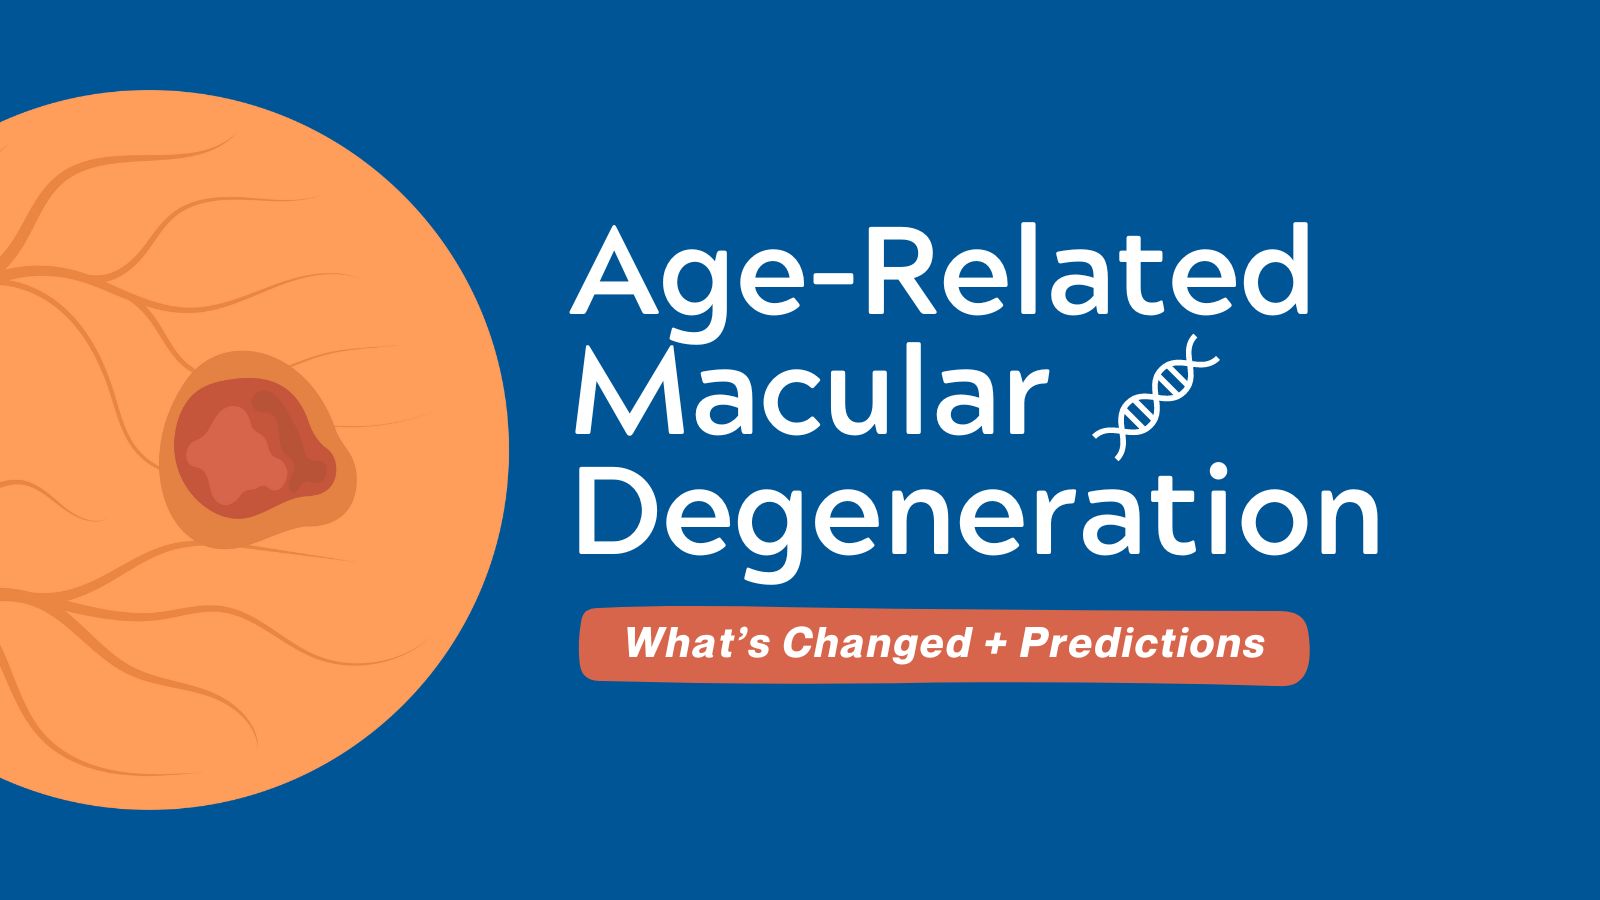 What's Changed & Predictions Age-Related Macular Degeneration